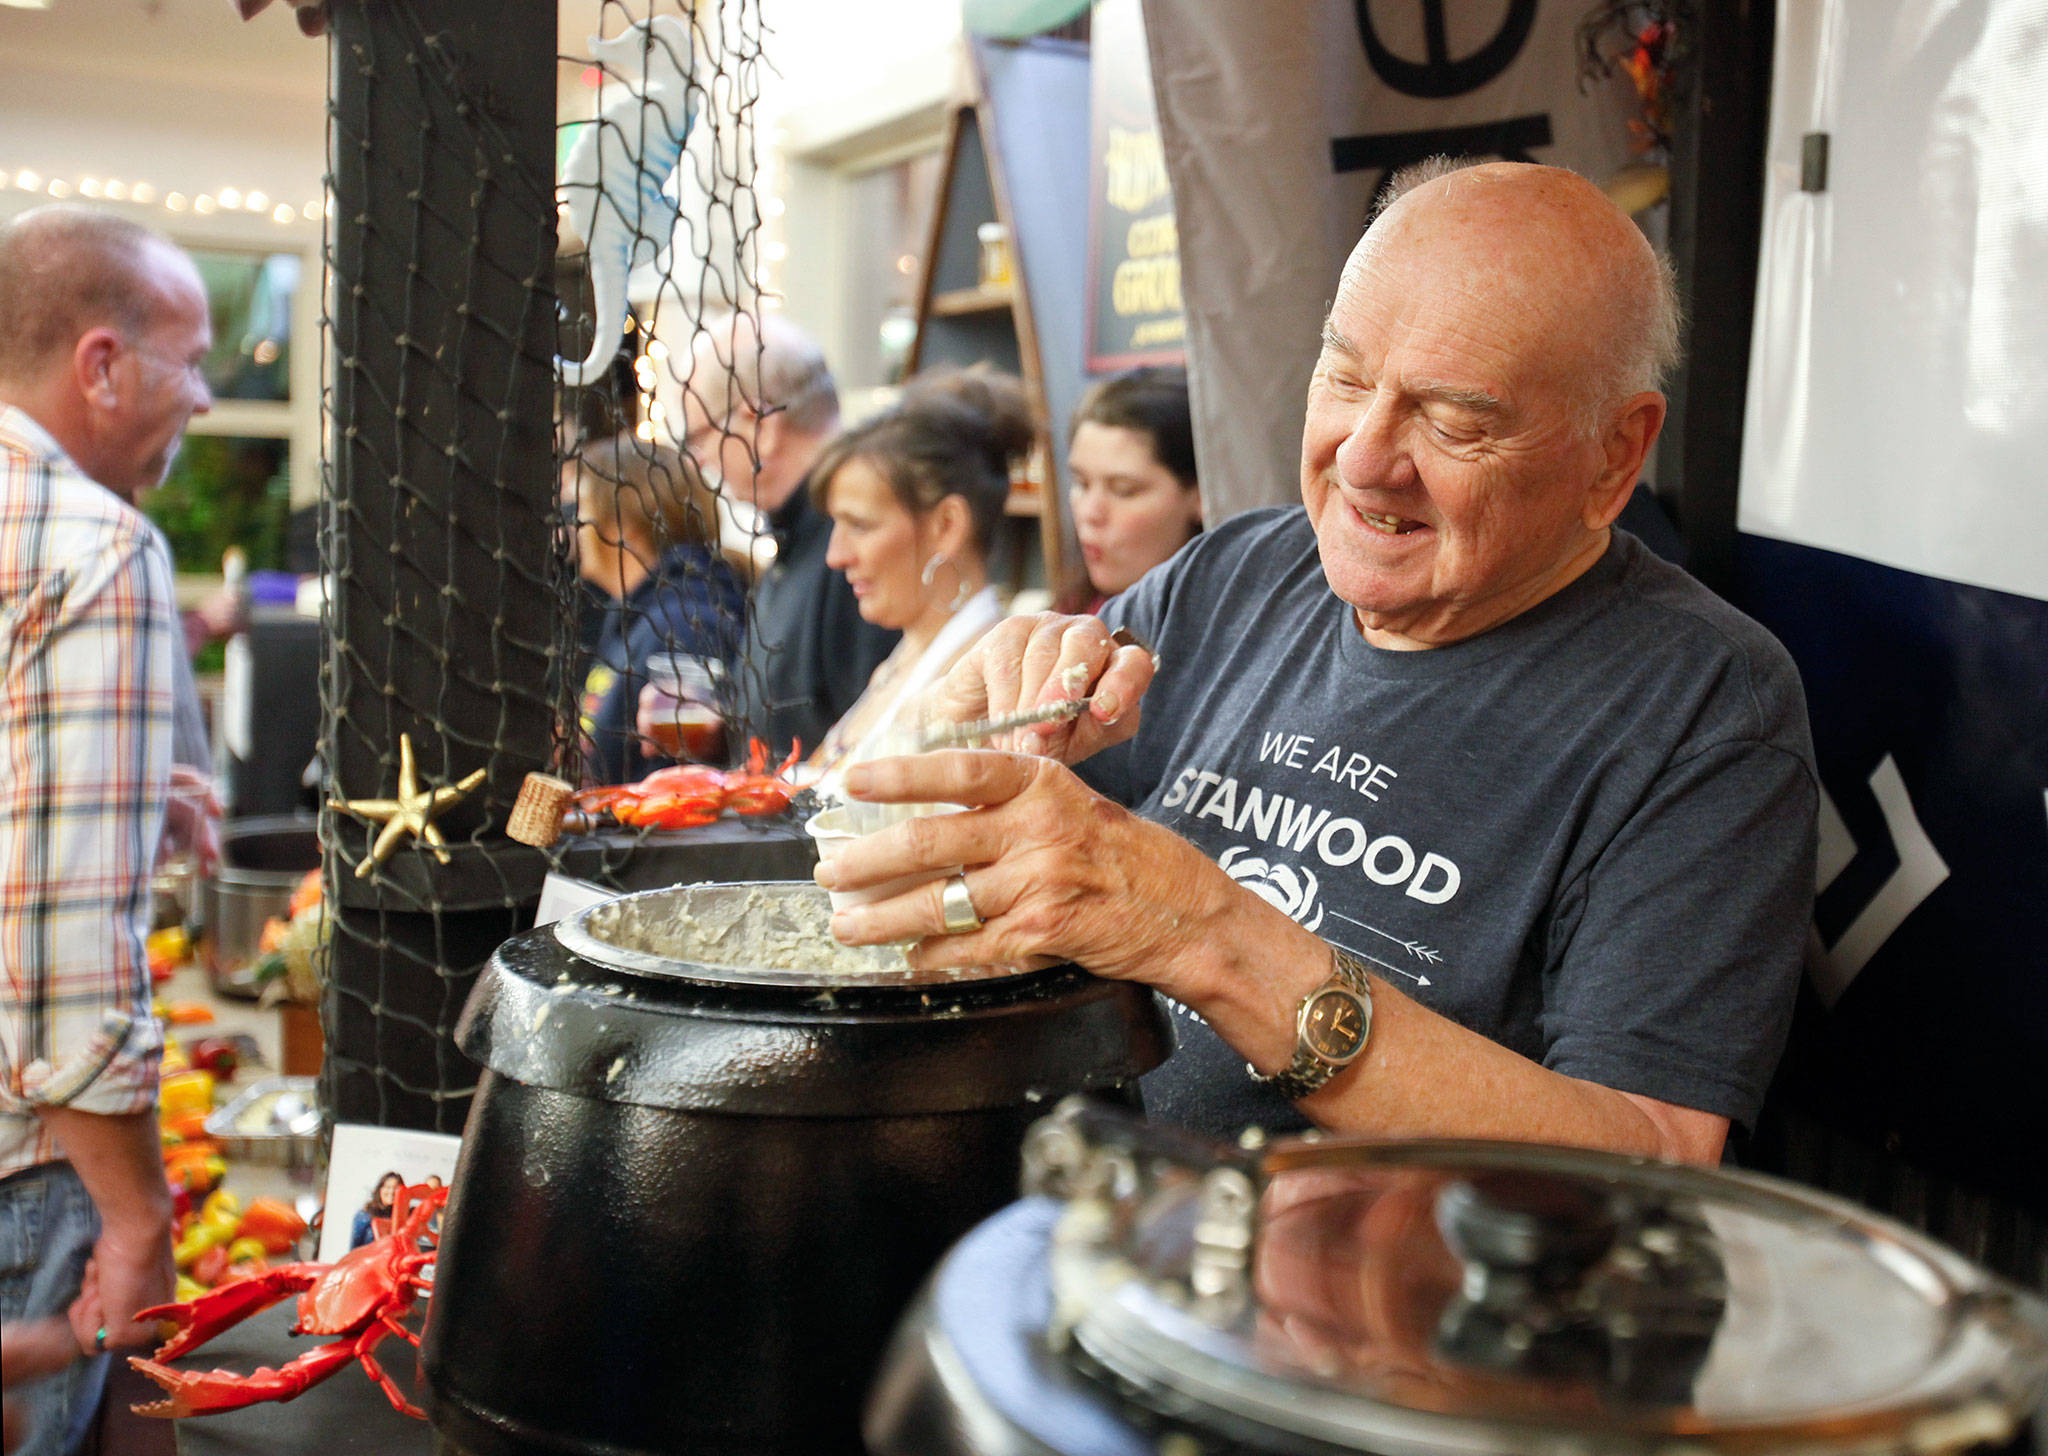 The 24th annual Chili & Chowder Cook-Off is Nov. 9 at the Camano Center on Camano Island. (Evan Thompson / Herald file)